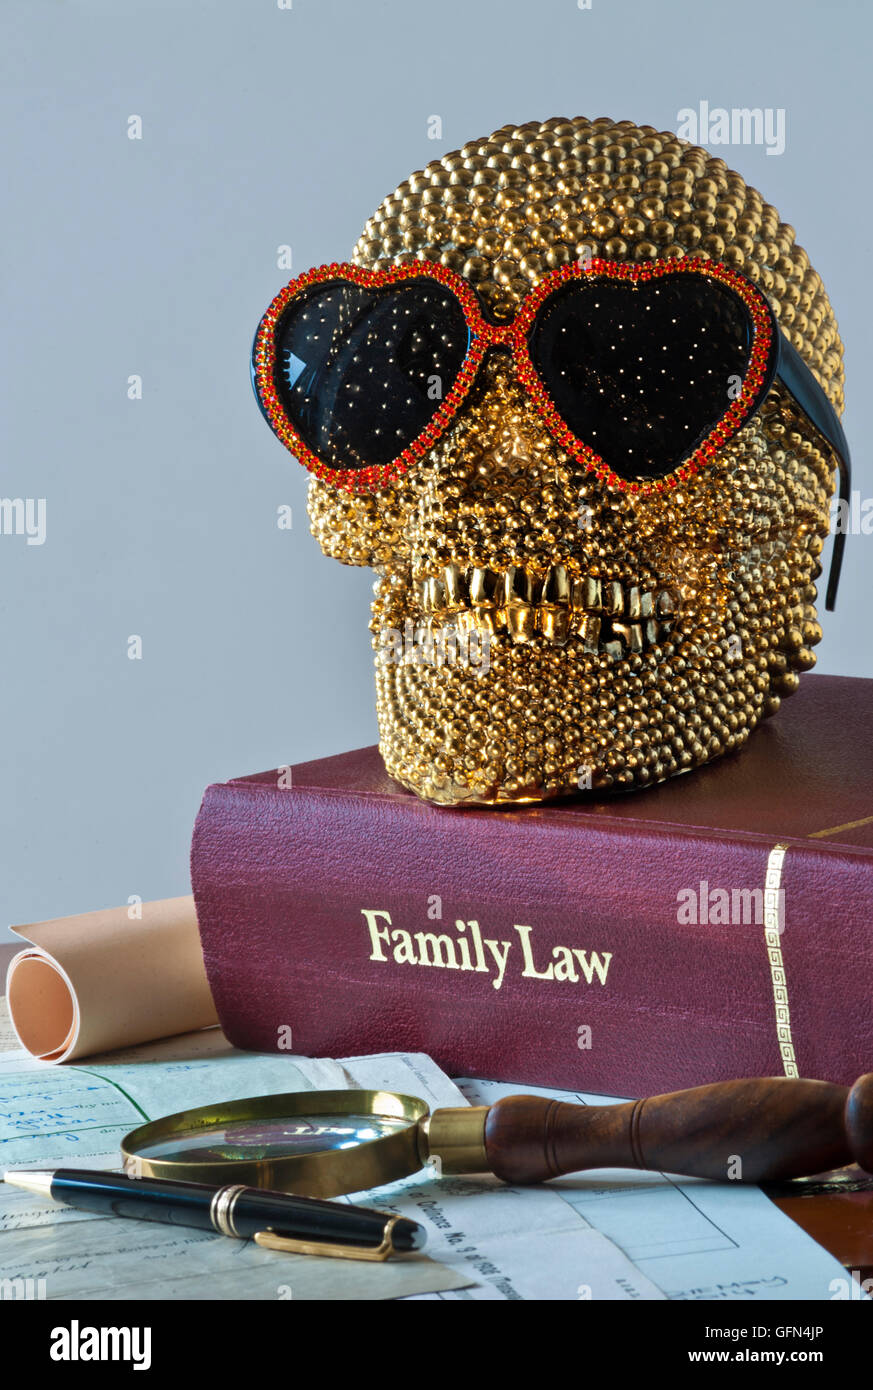 Concept of smiling gold skull wearing heart shaped sunglasses on Family Law book with various official legal family documents Stock Photo